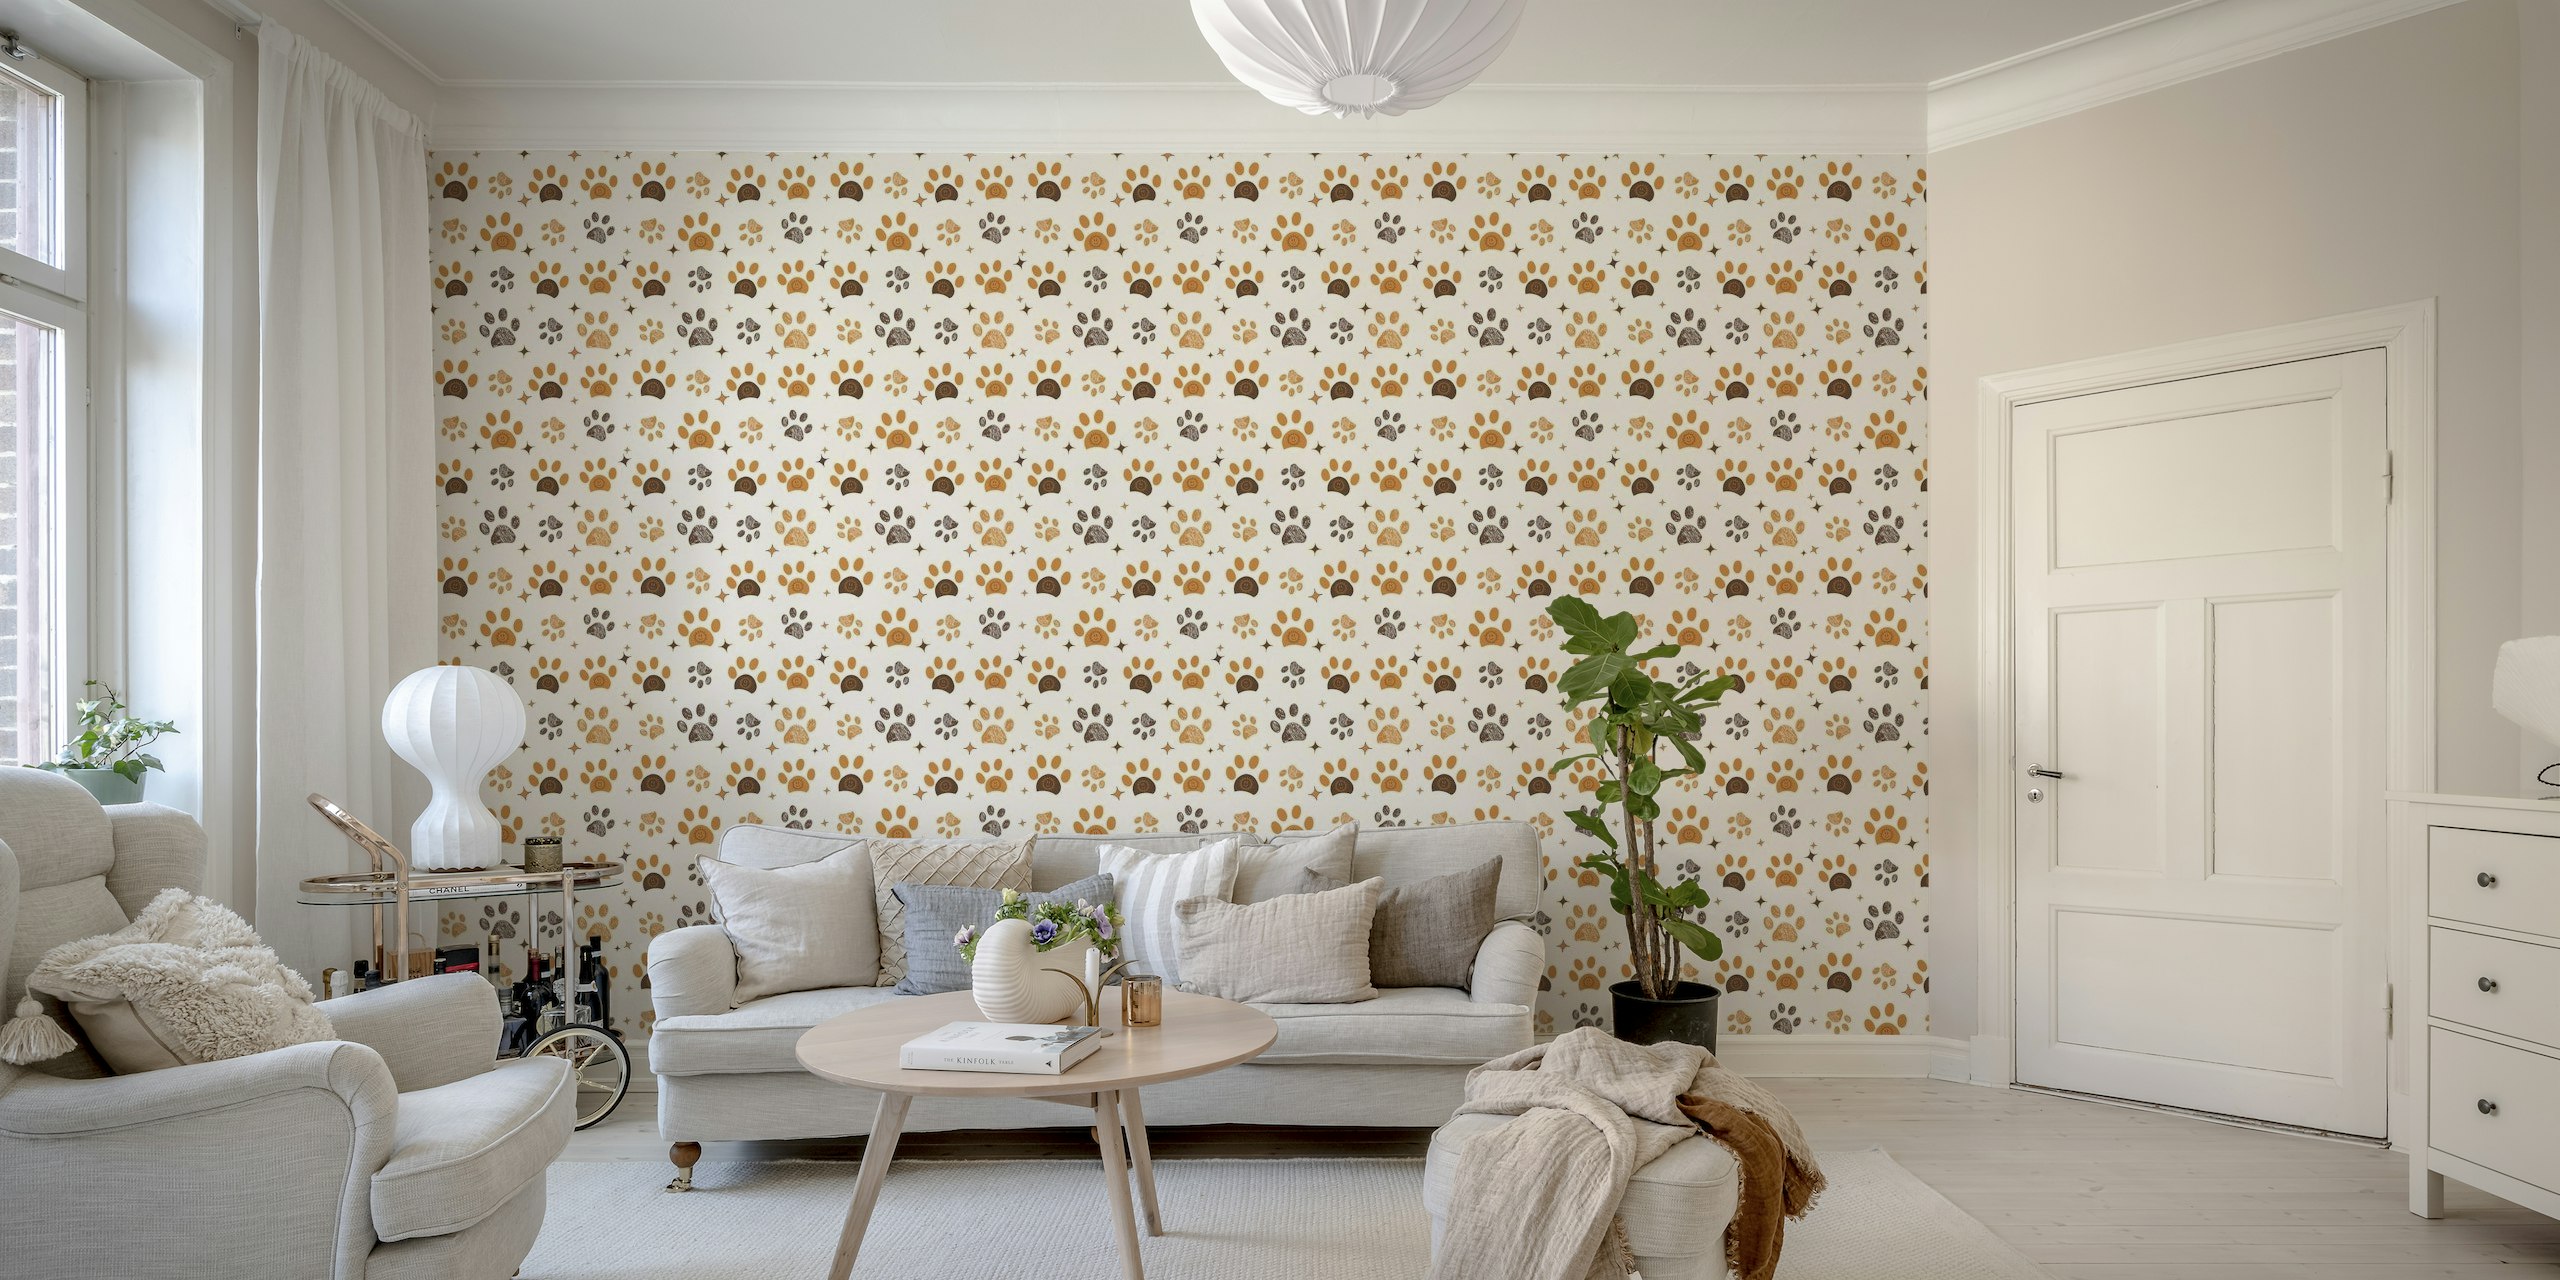 Adorable paw prints and stars pattern wall mural on a light background